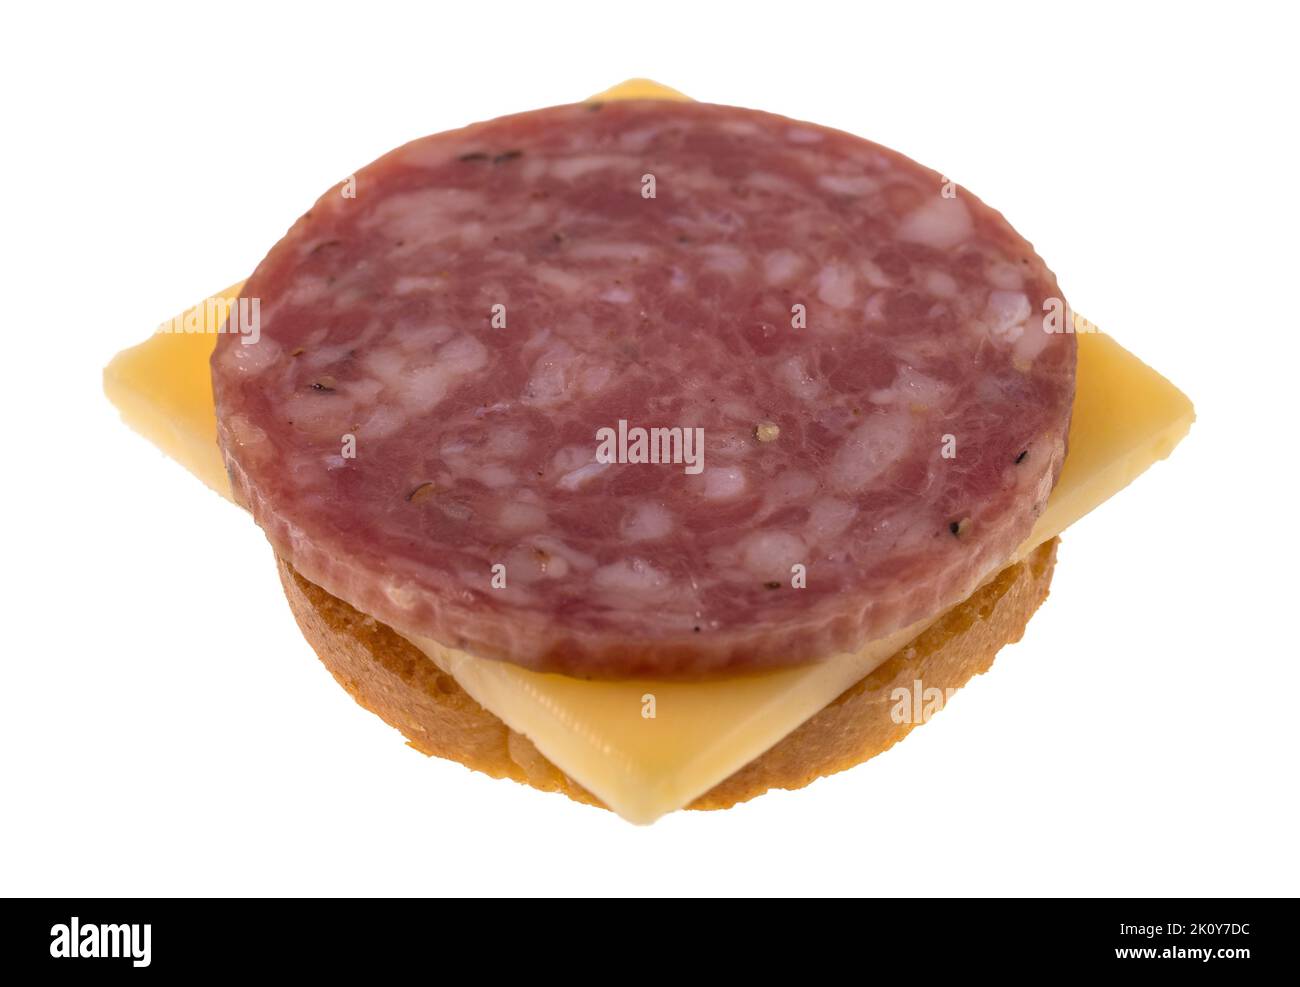 Side view of a slice of dry salami with gouda cheese on a round cracker isolated on a white background. Stock Photo